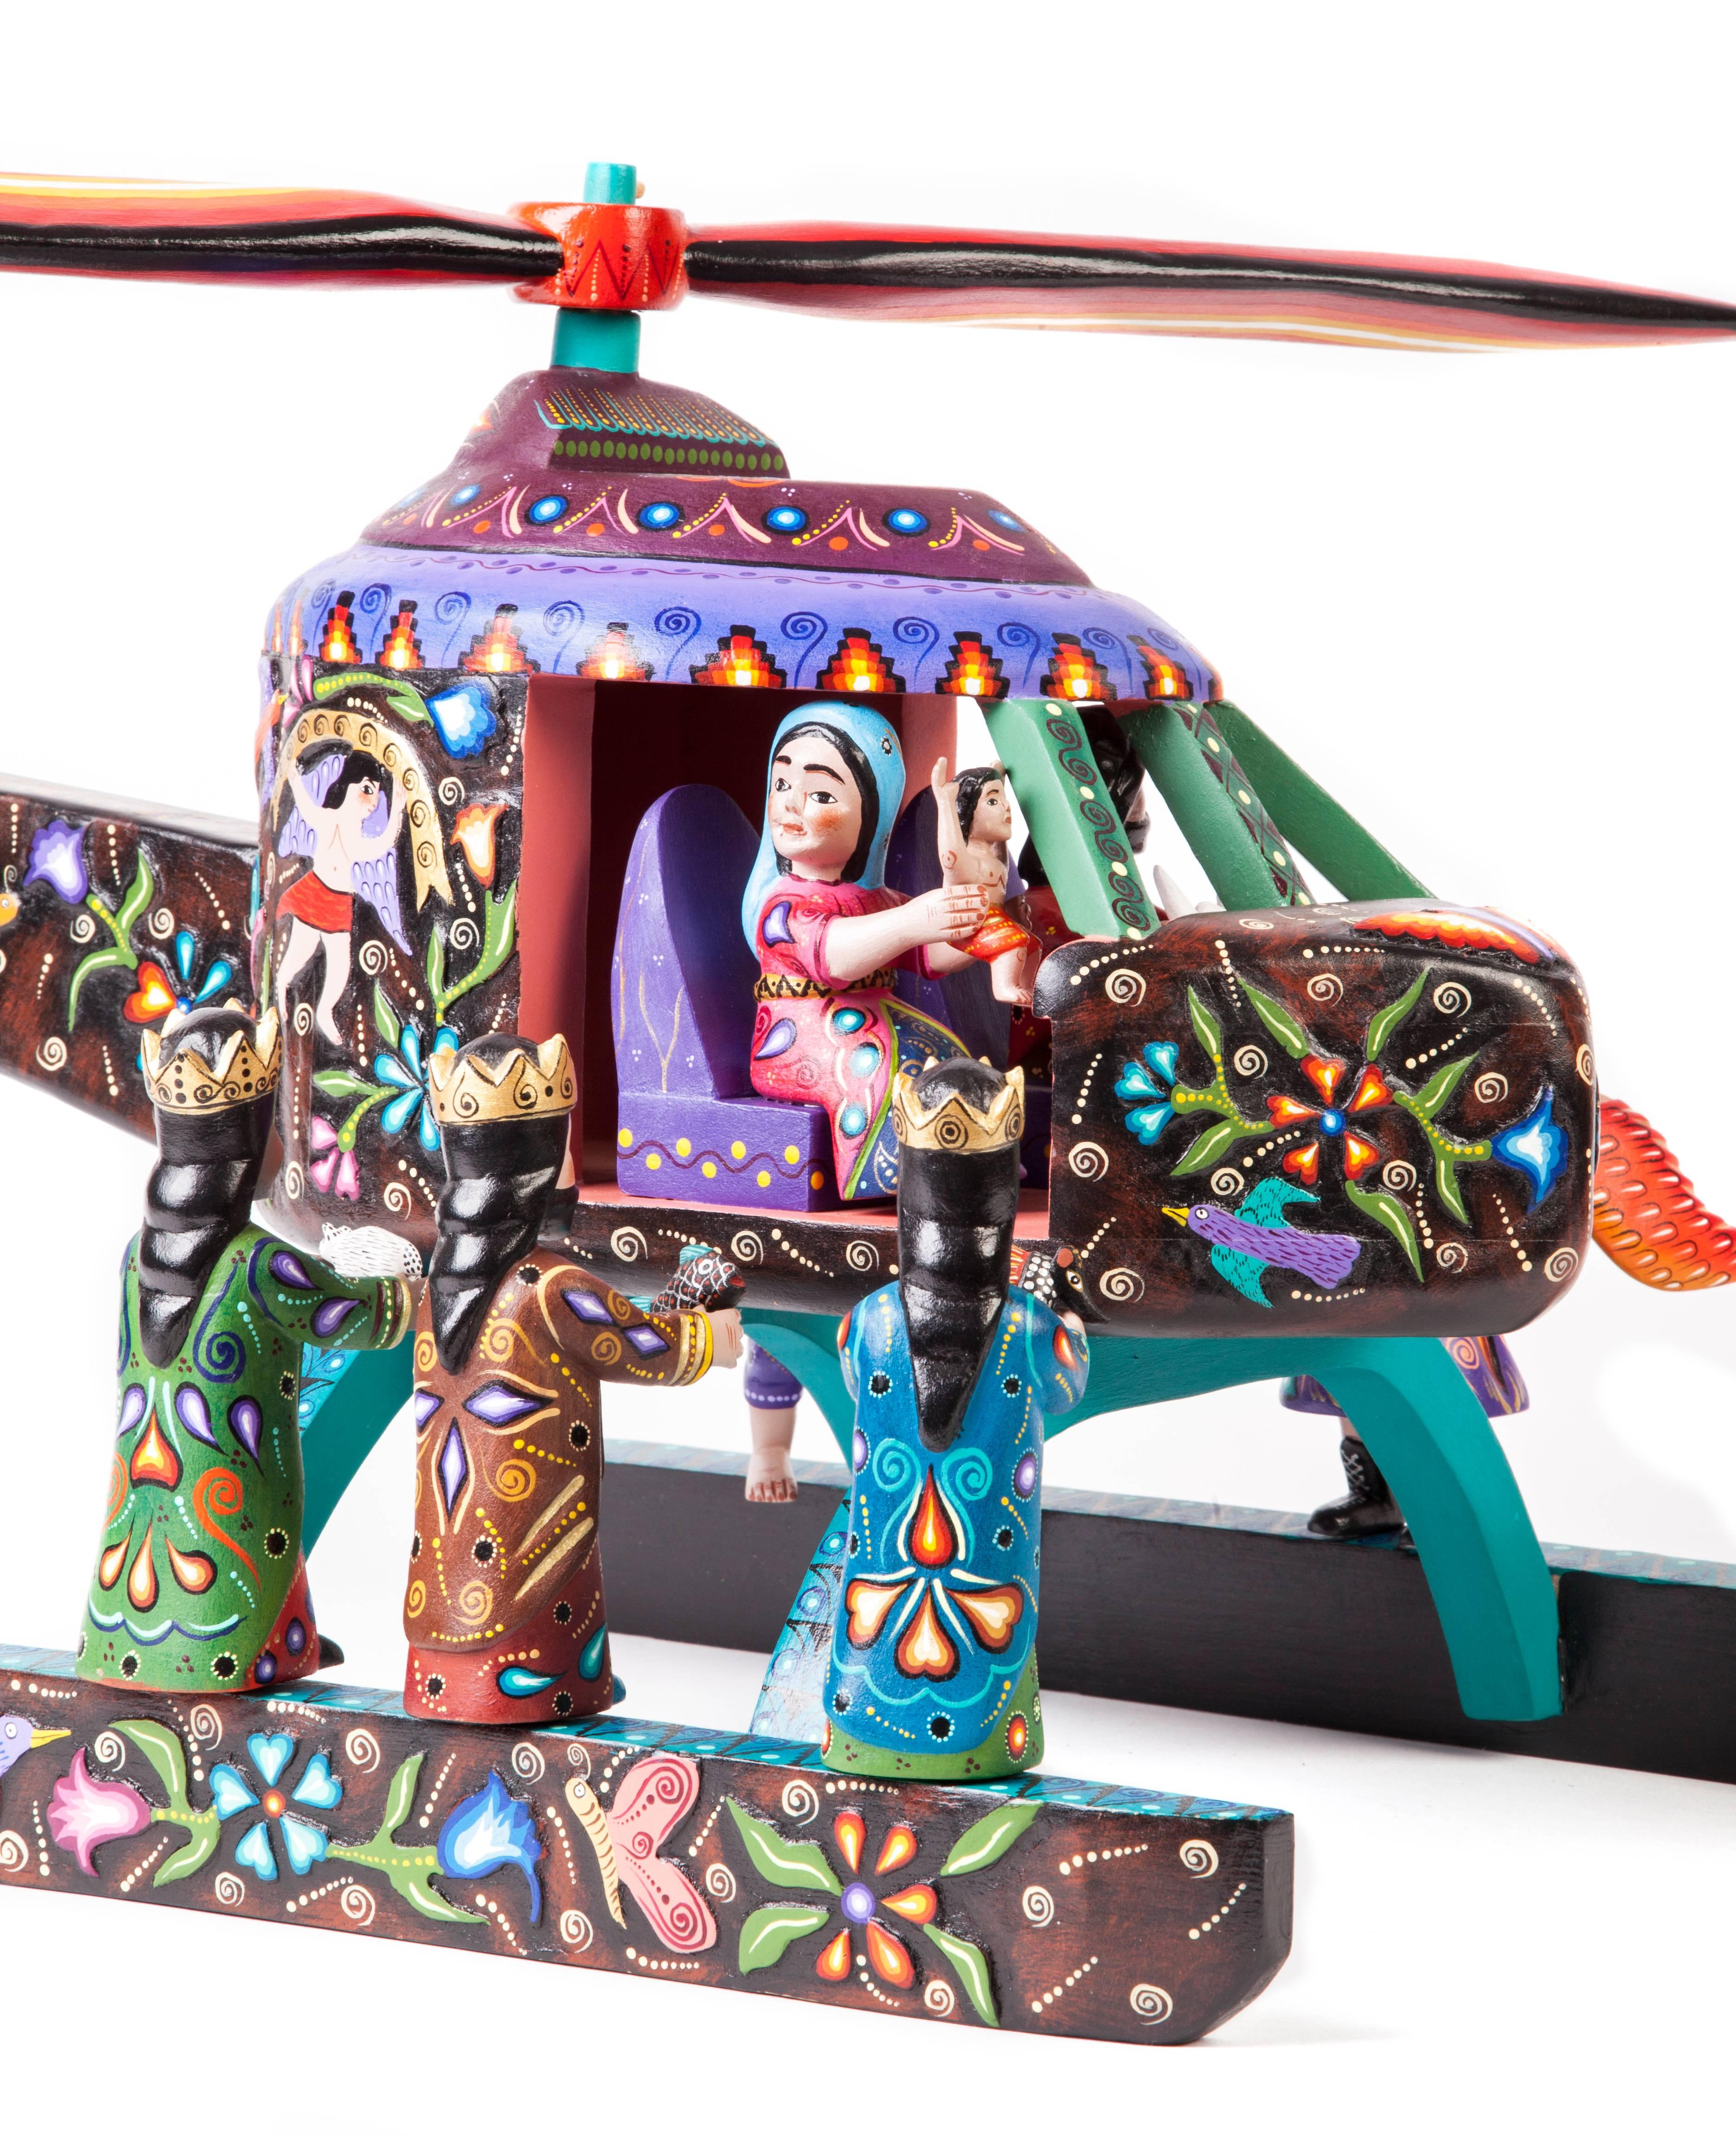 16'' Wood carving Nativity Helicoptero Mexican Folk Art - Sculpture by Agustin Cruz Prudencio